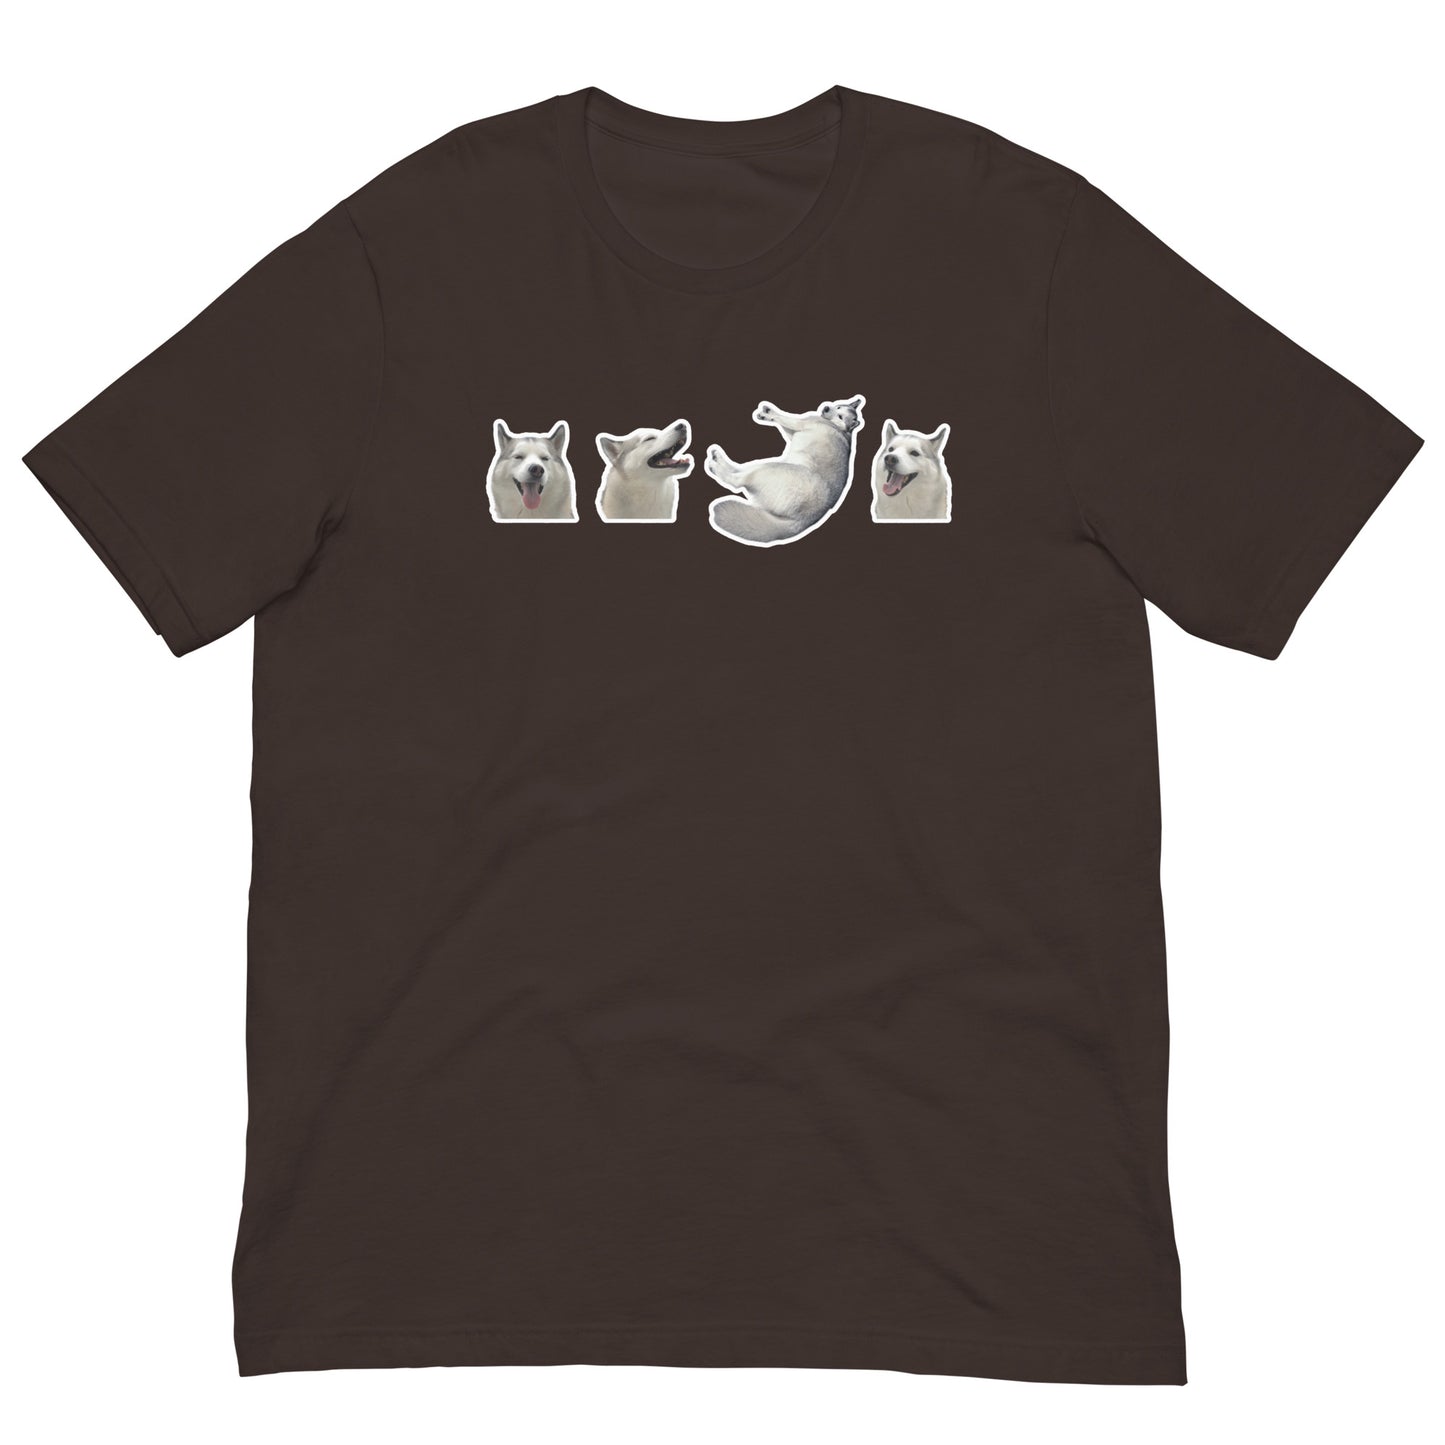 Brown Quality Tee - Front Design with a stamp of 4 FUJI THE HUSKY Sticker - Back Design with 1 FUJI THE HUSKY Sticker and Uniwari Logo